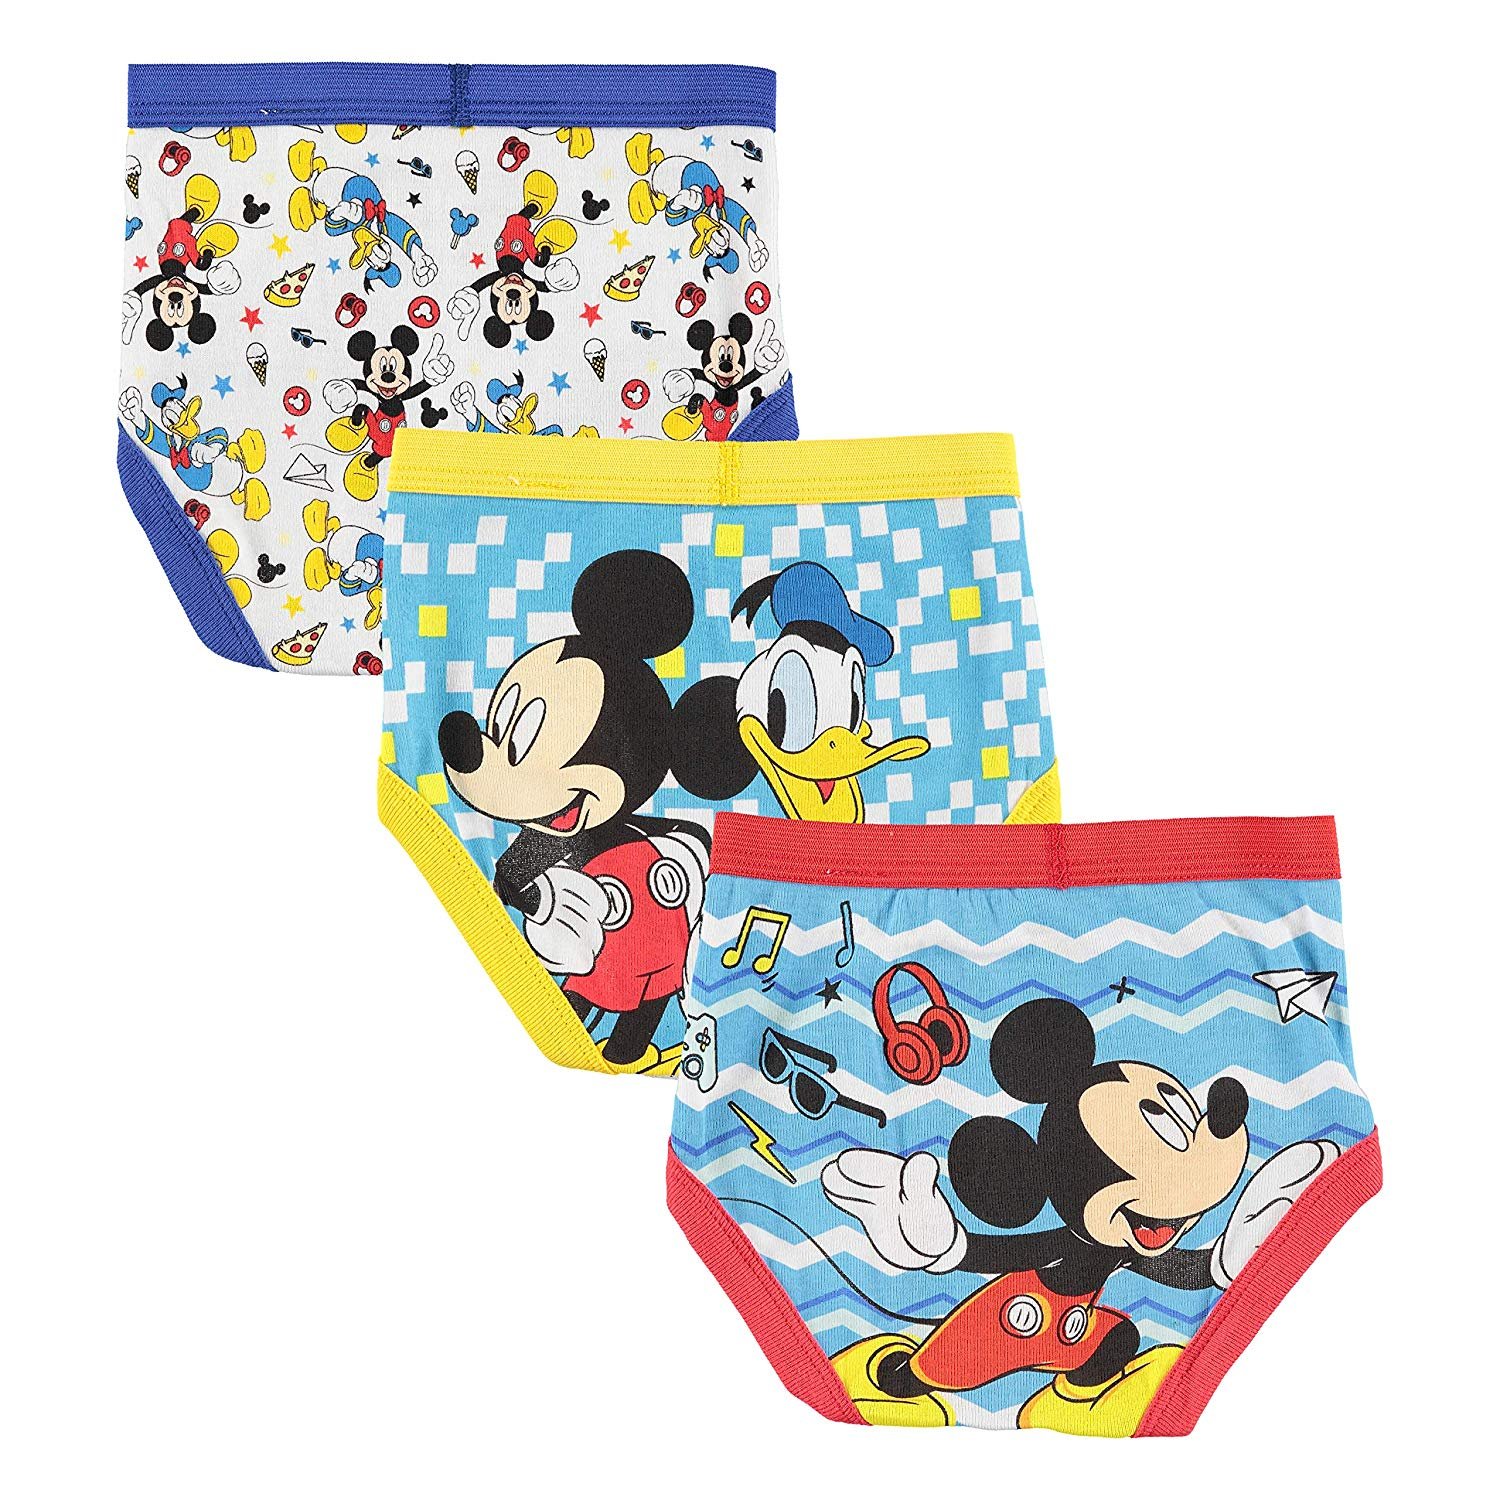 Buy Disney toddler boys 7 pack mickey mouse cotton brief blue combo Online